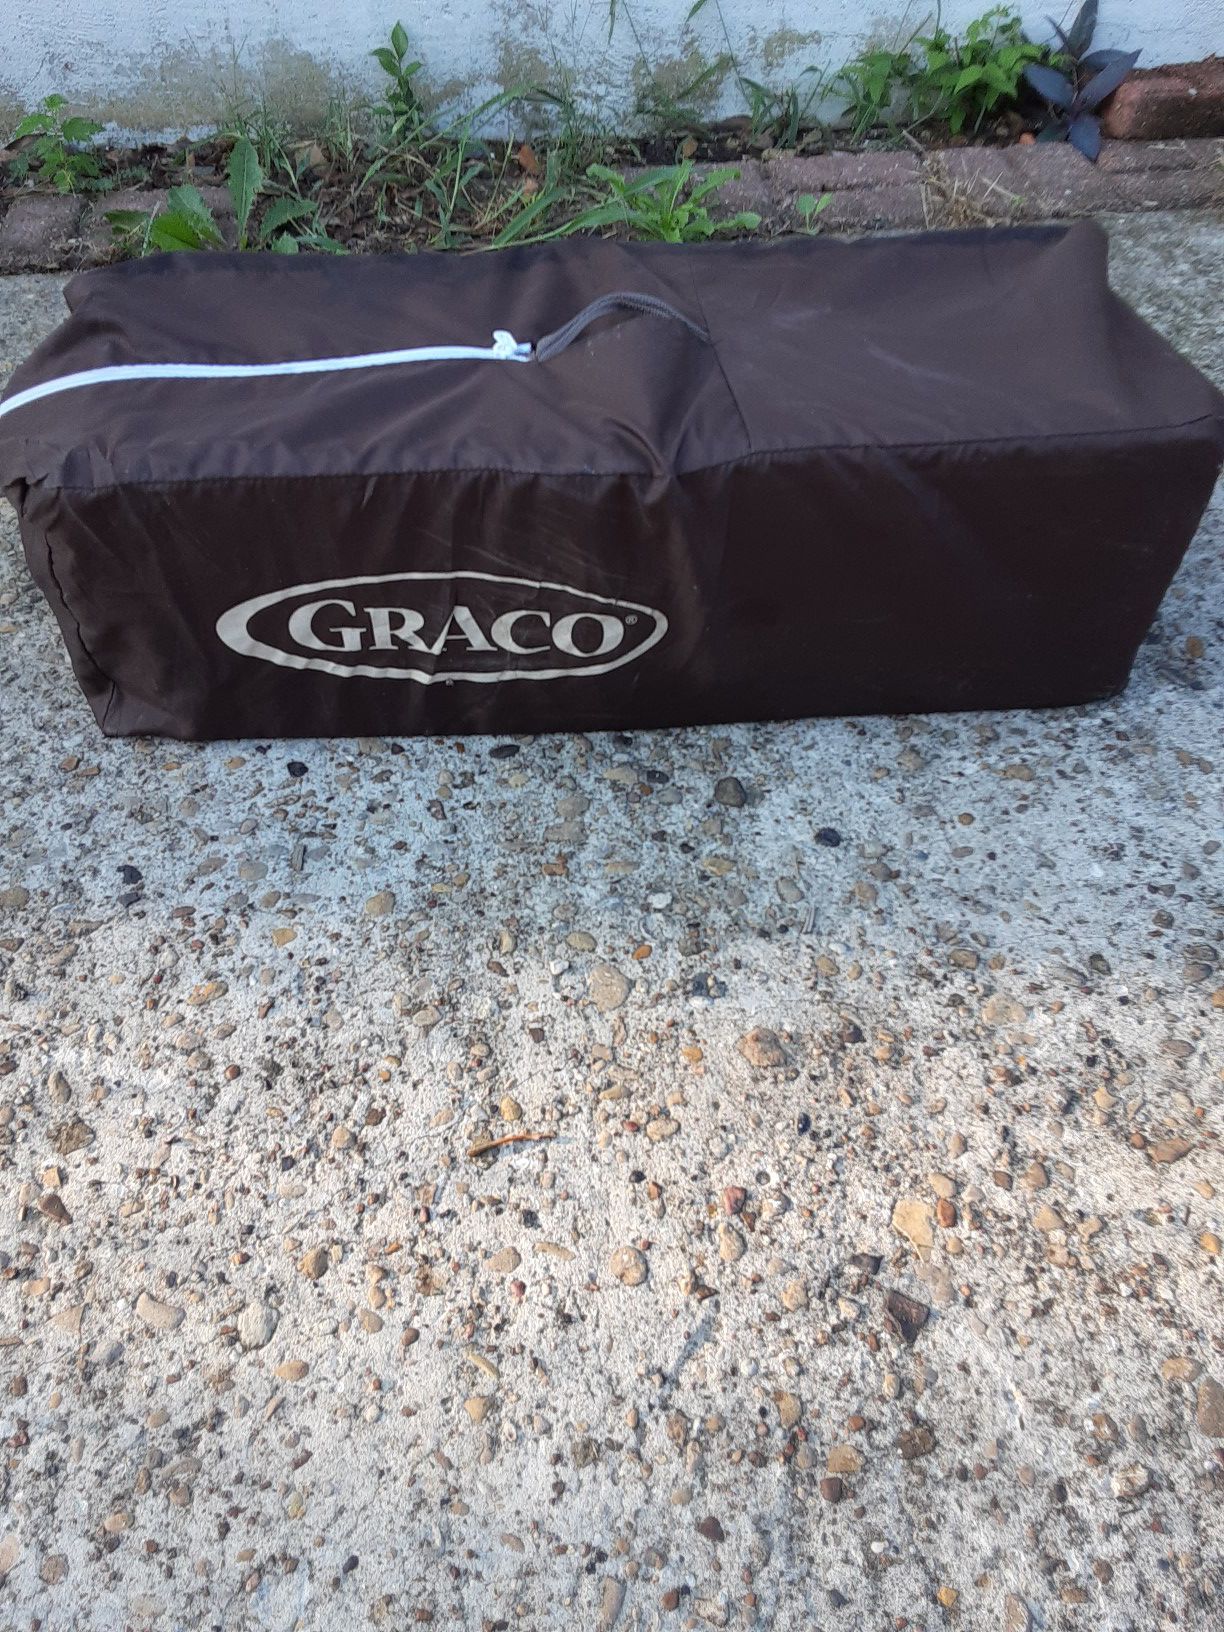 Graco playpen $15.00 cash only (serious buyers)